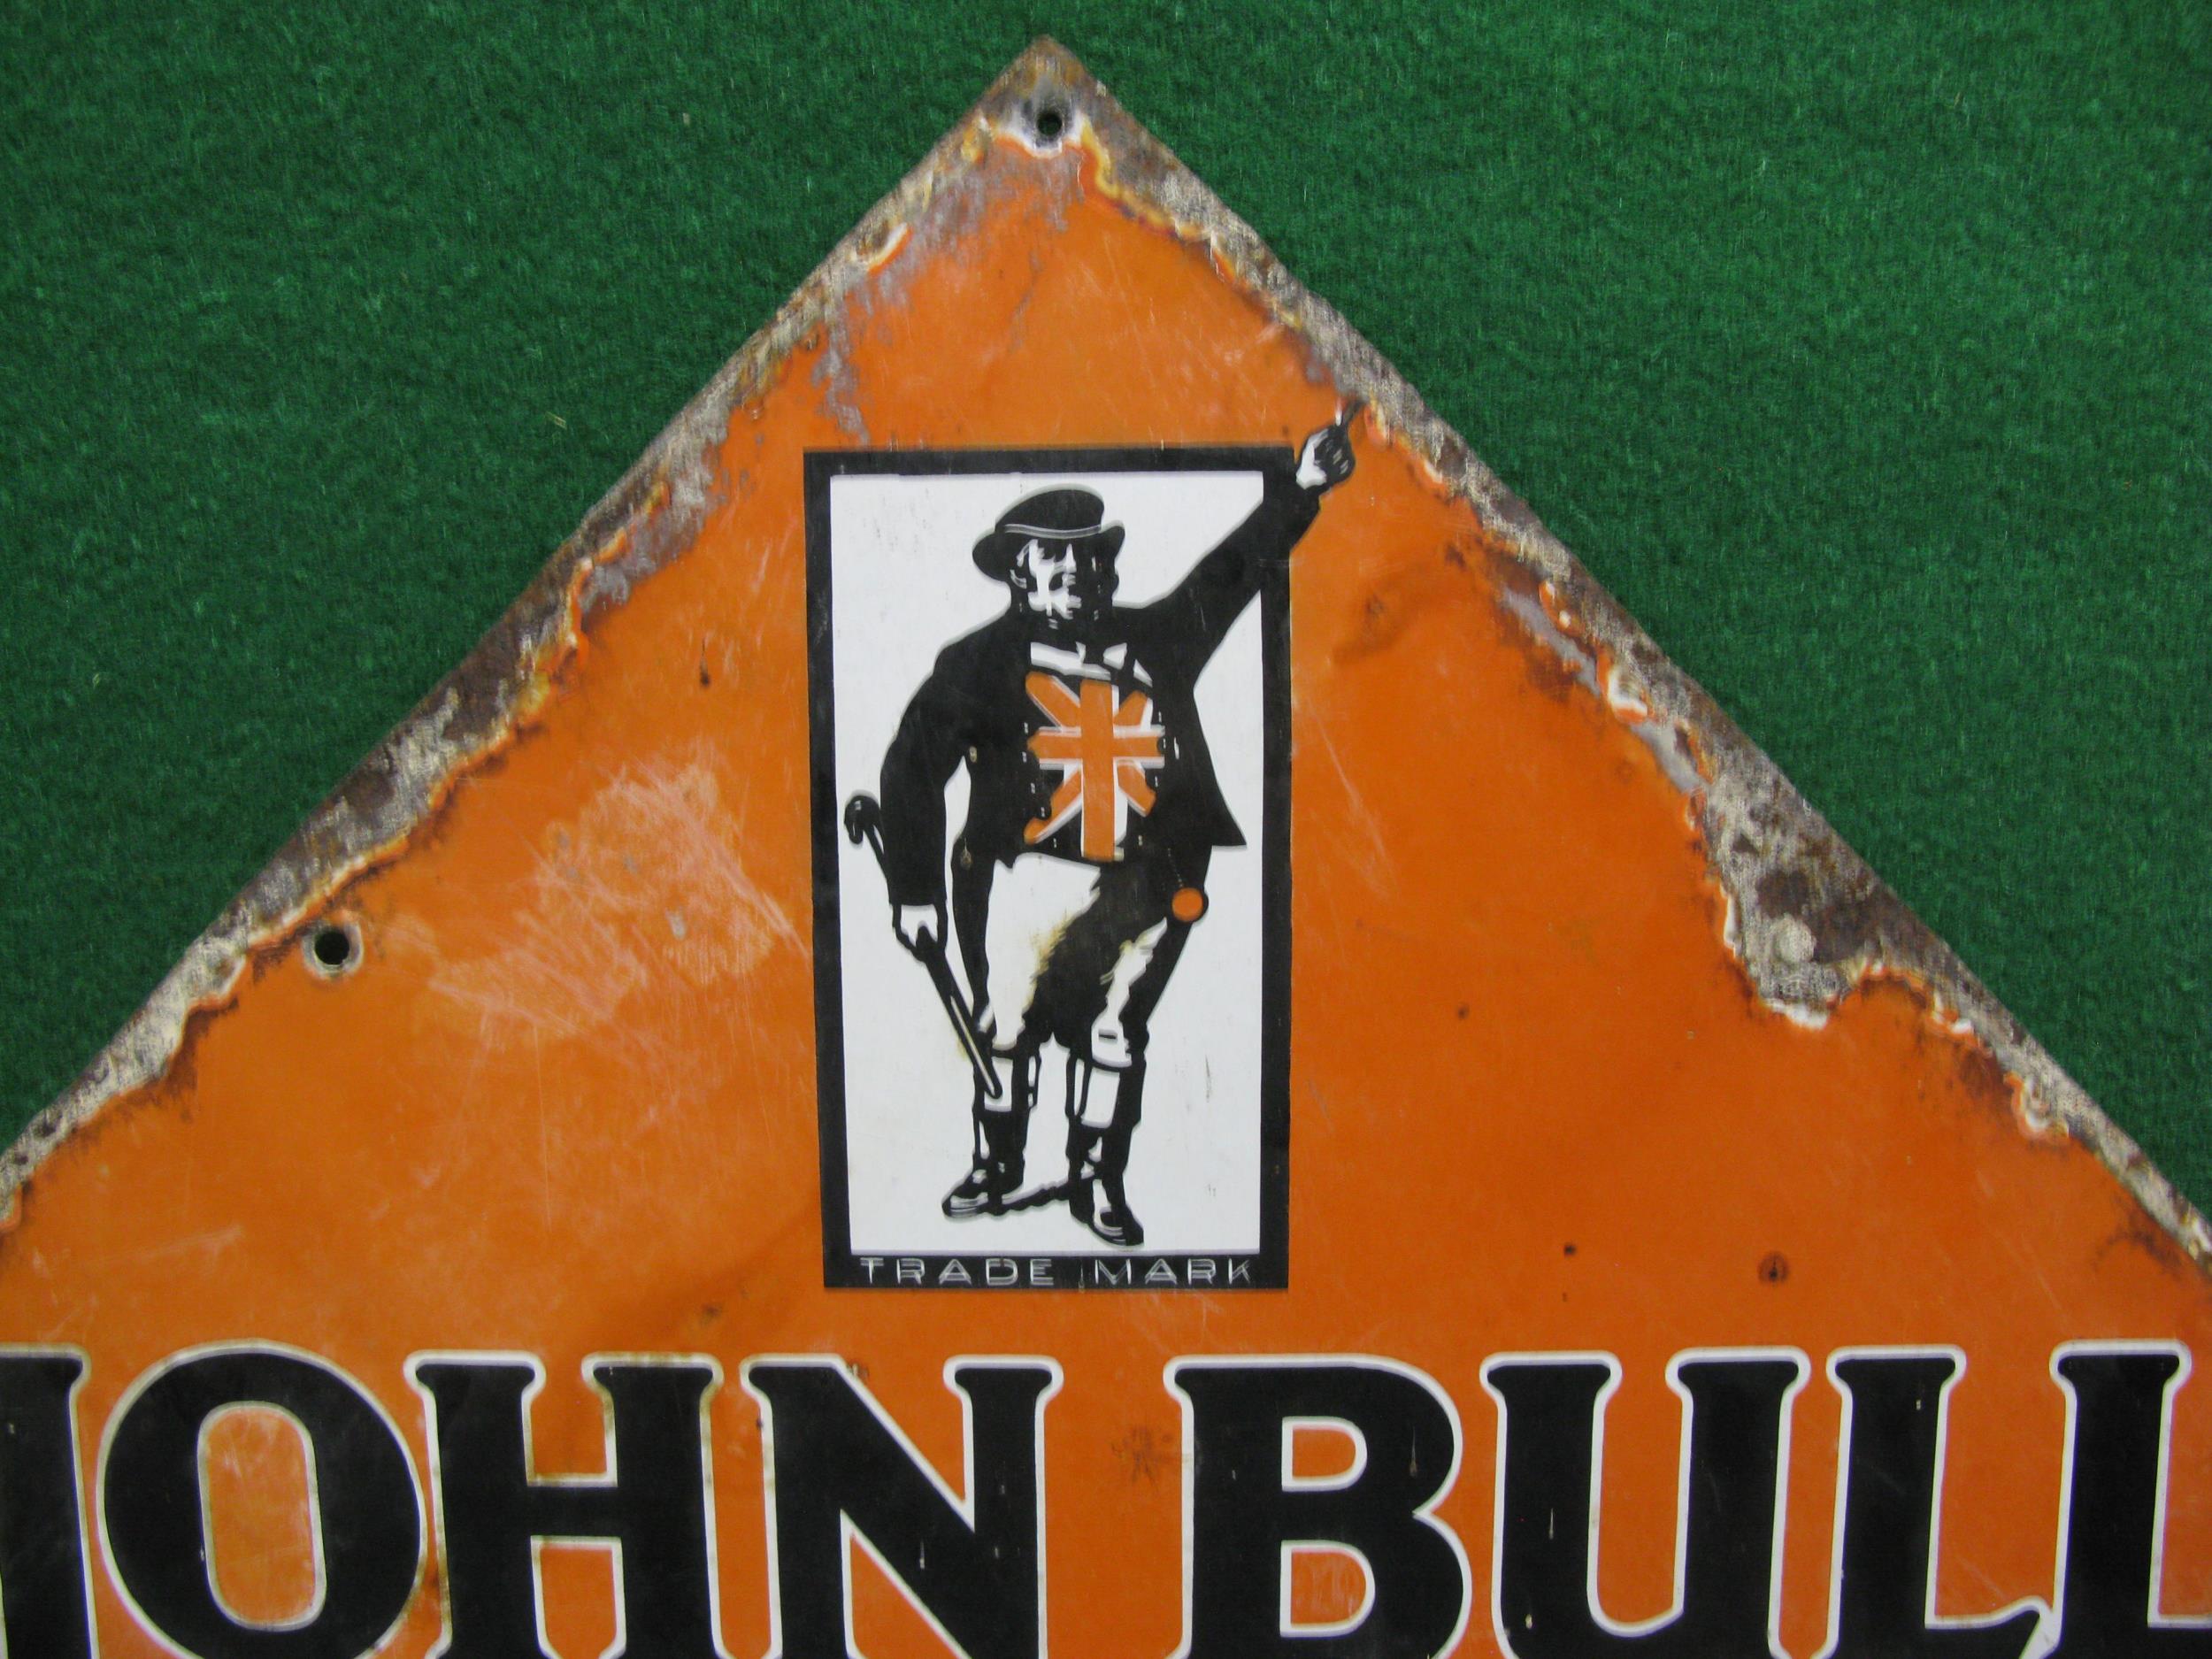 Double sided diamond enamel sign for John Bull Tyres & Accessories featuring the trade mark - Image 2 of 3